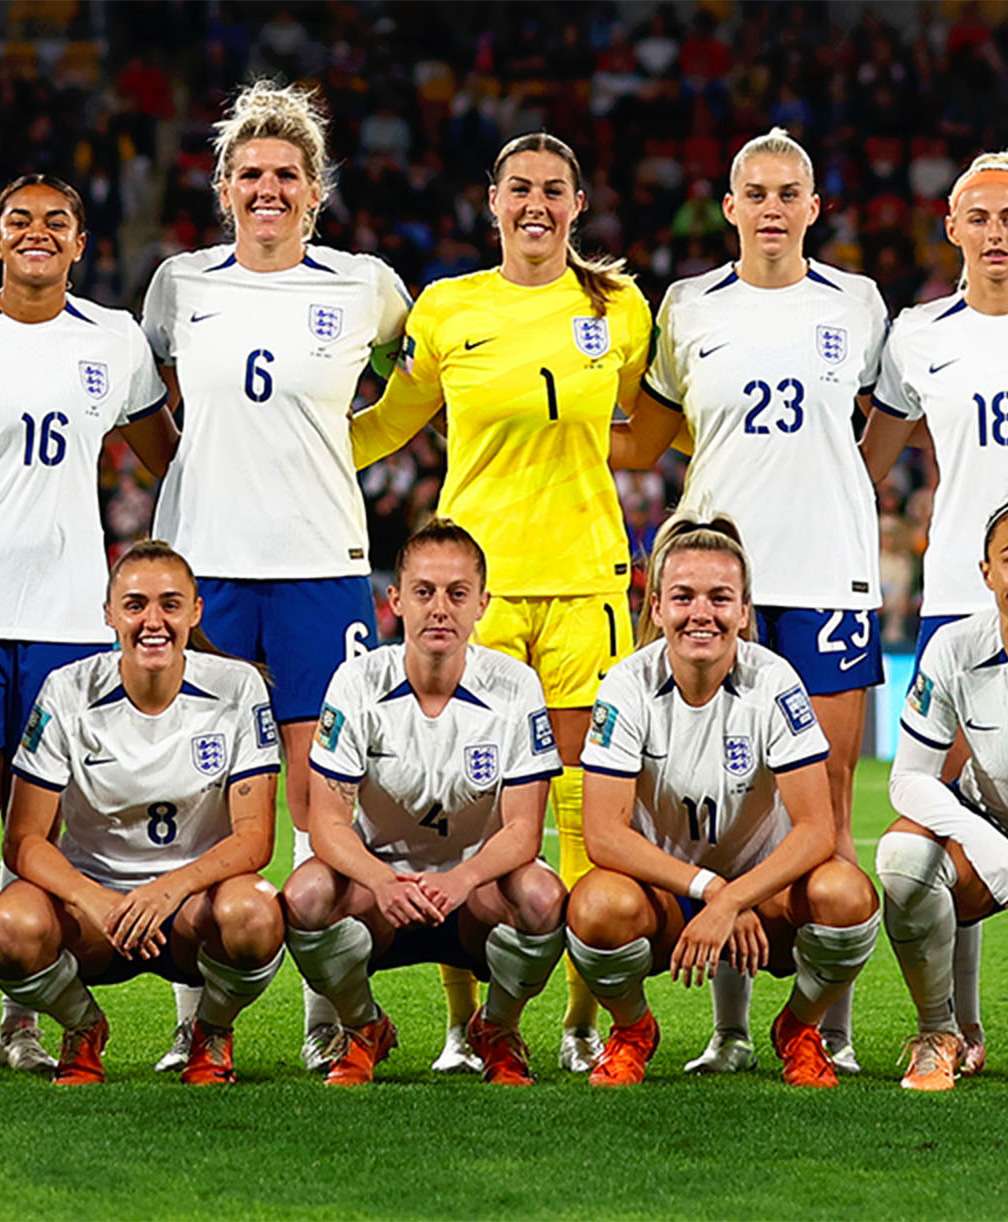 England women's national football team line-up for a photo during the FIFA Women's World Cup Australia & New Zealand 2023